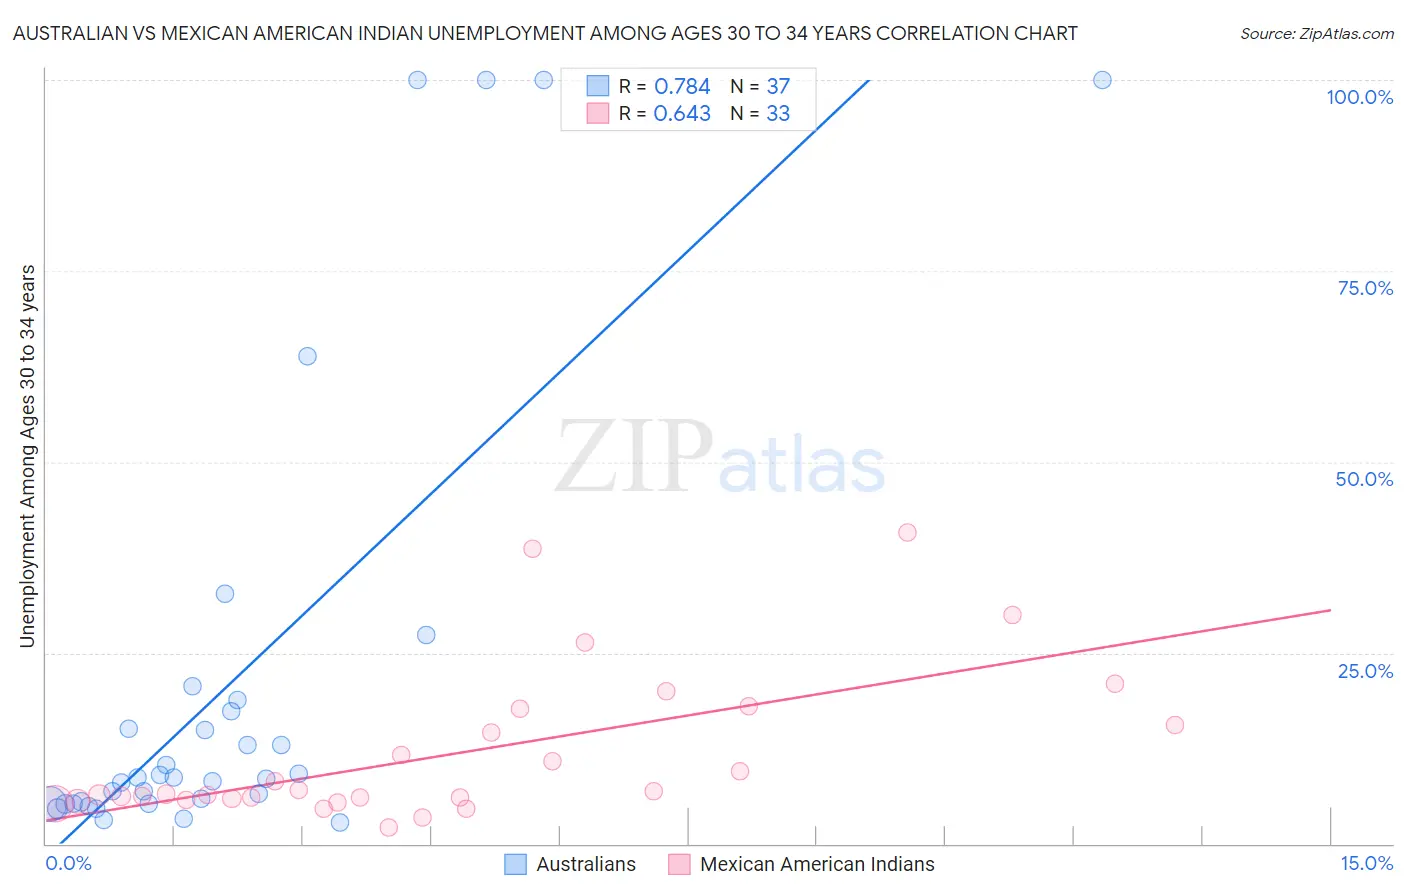 Australian vs Mexican American Indian Unemployment Among Ages 30 to 34 years